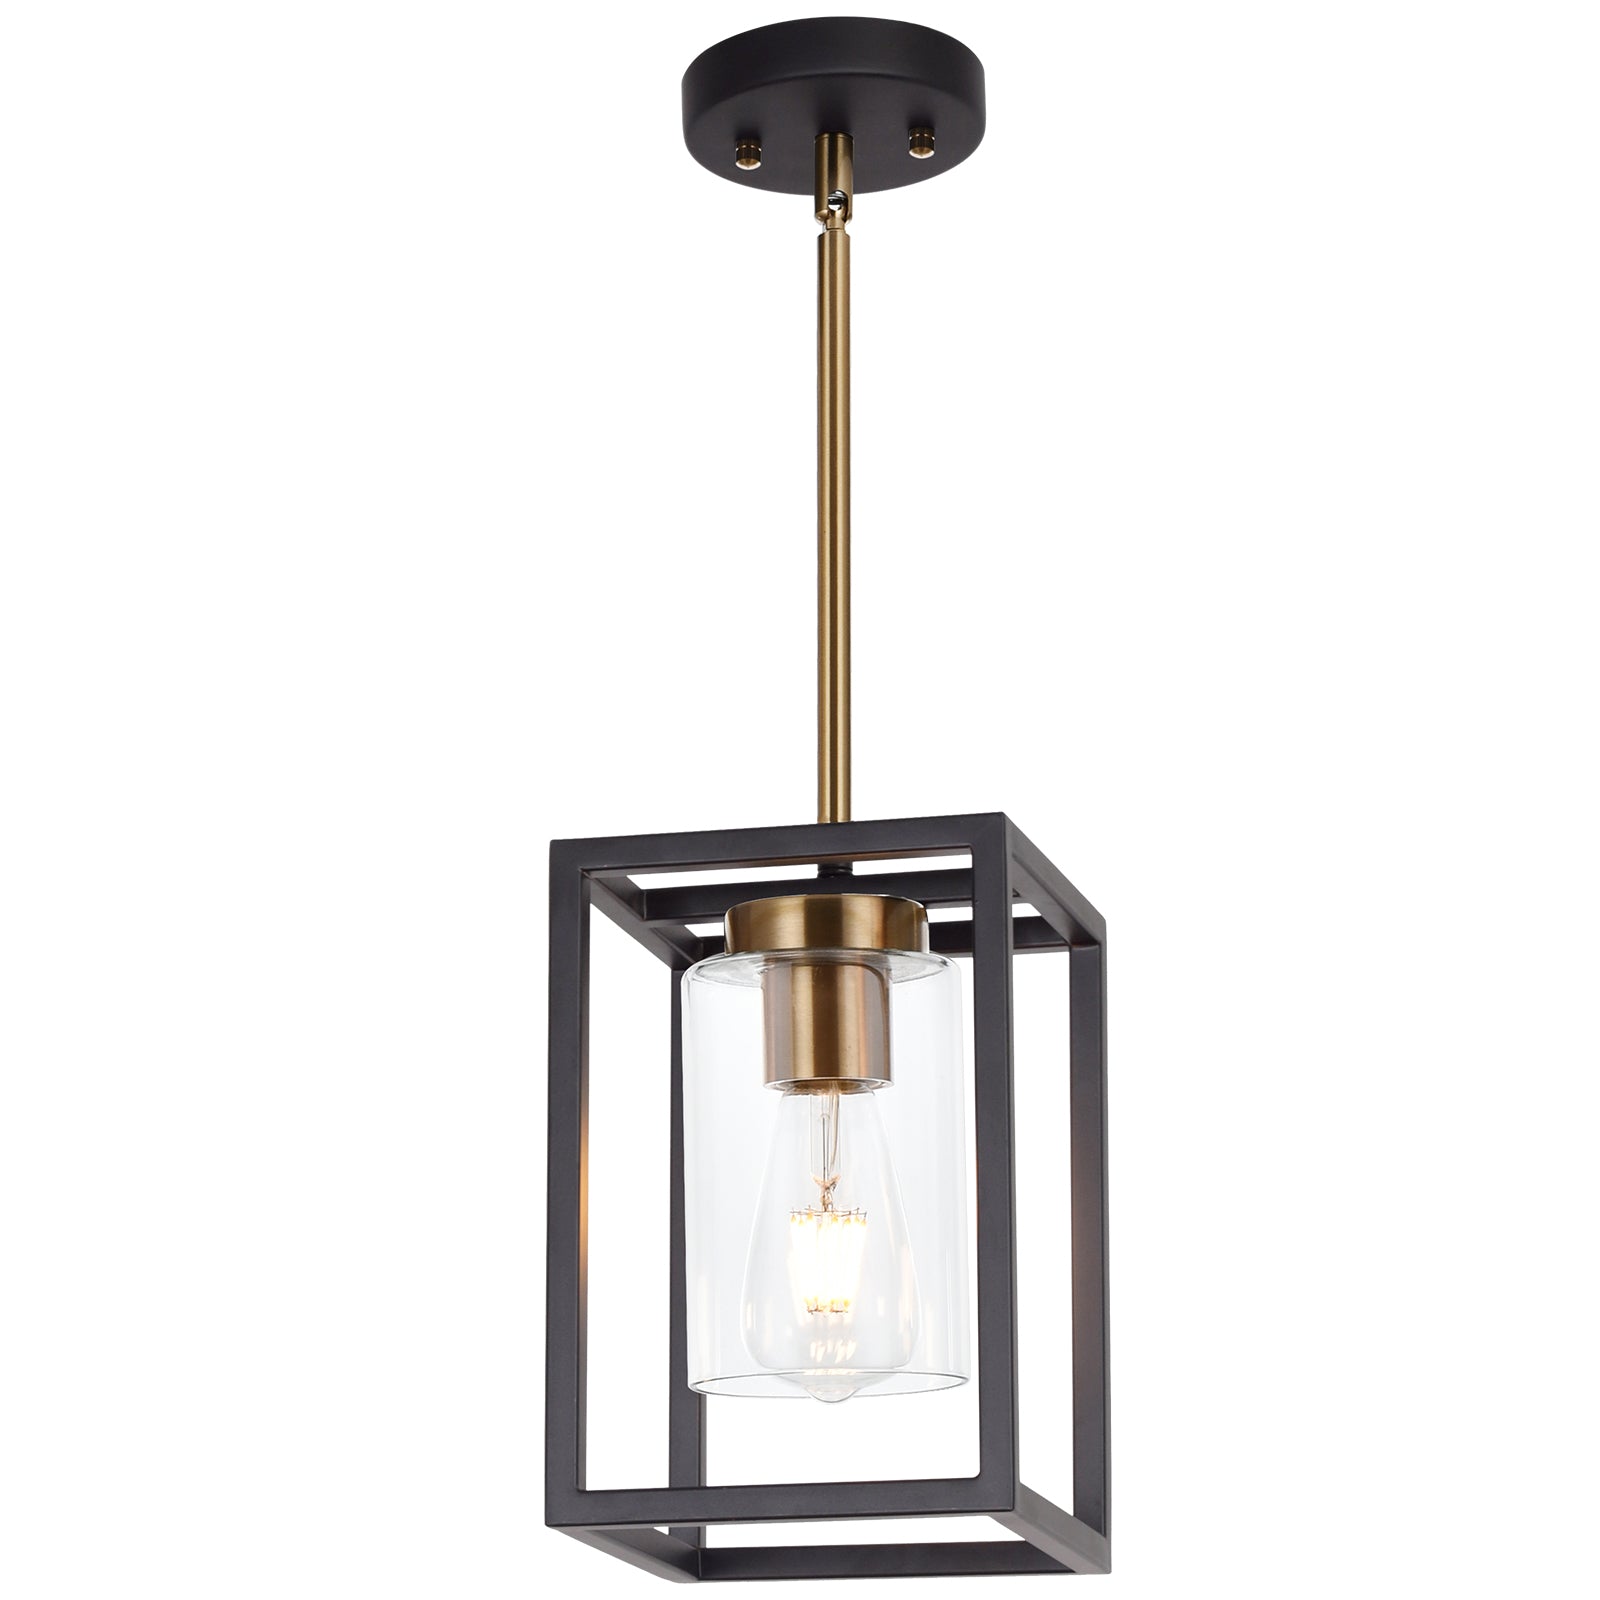 1-Light Interior Lantern Pendant Light,Black and Brushed Brass Finish Farmhouse Chandelier with Clear Glass Shade Foyer Cage Hanging Ceiling Lighting for Kitchen Island Dining Room Entryway